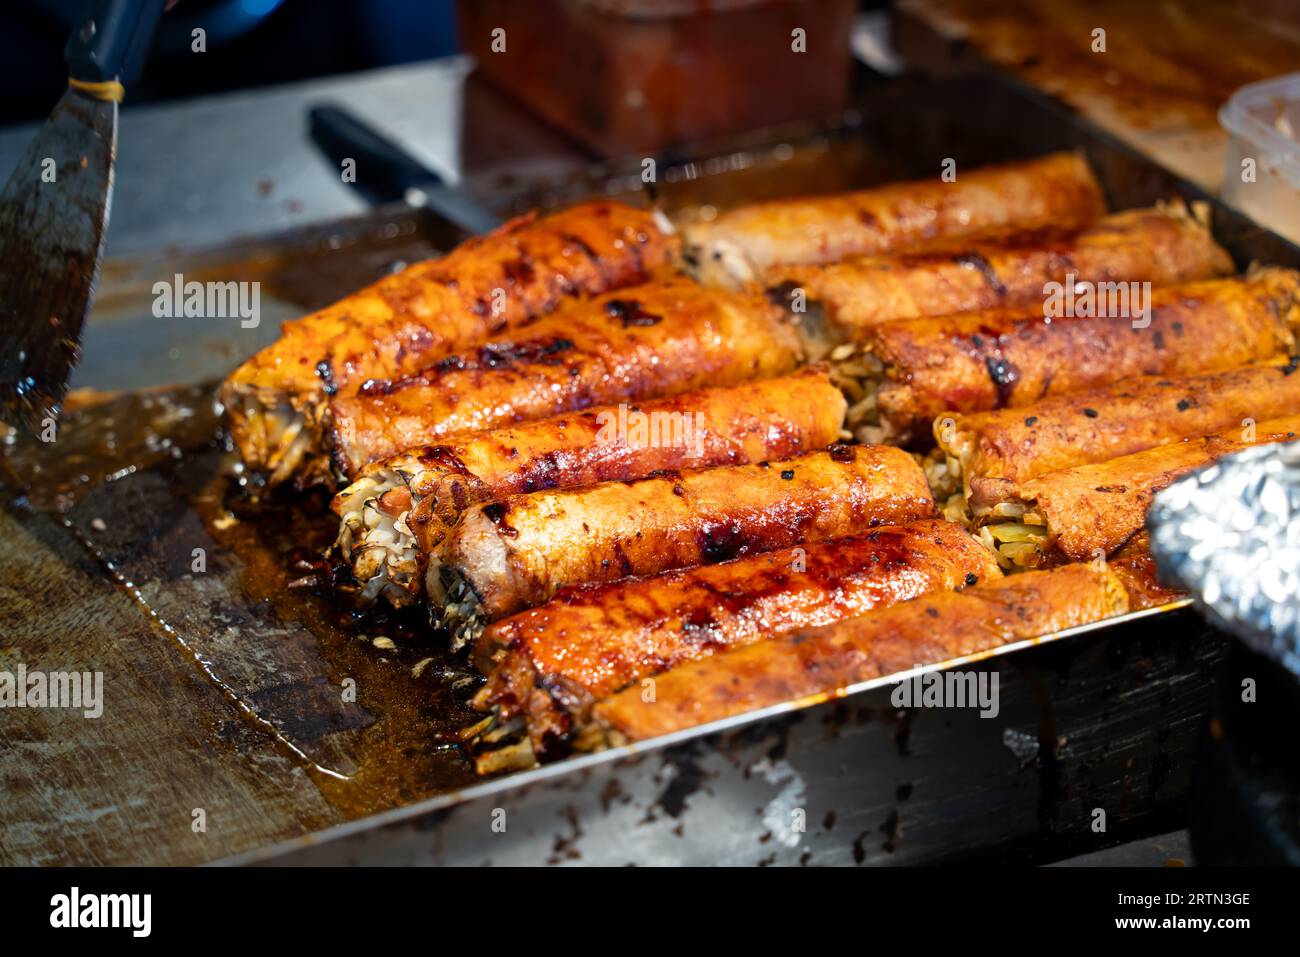 Grilling barbecue meatloaf rolled with vegetables, pork or beef at traditional night market stall, delicious street food in South Korea. Stock Photo